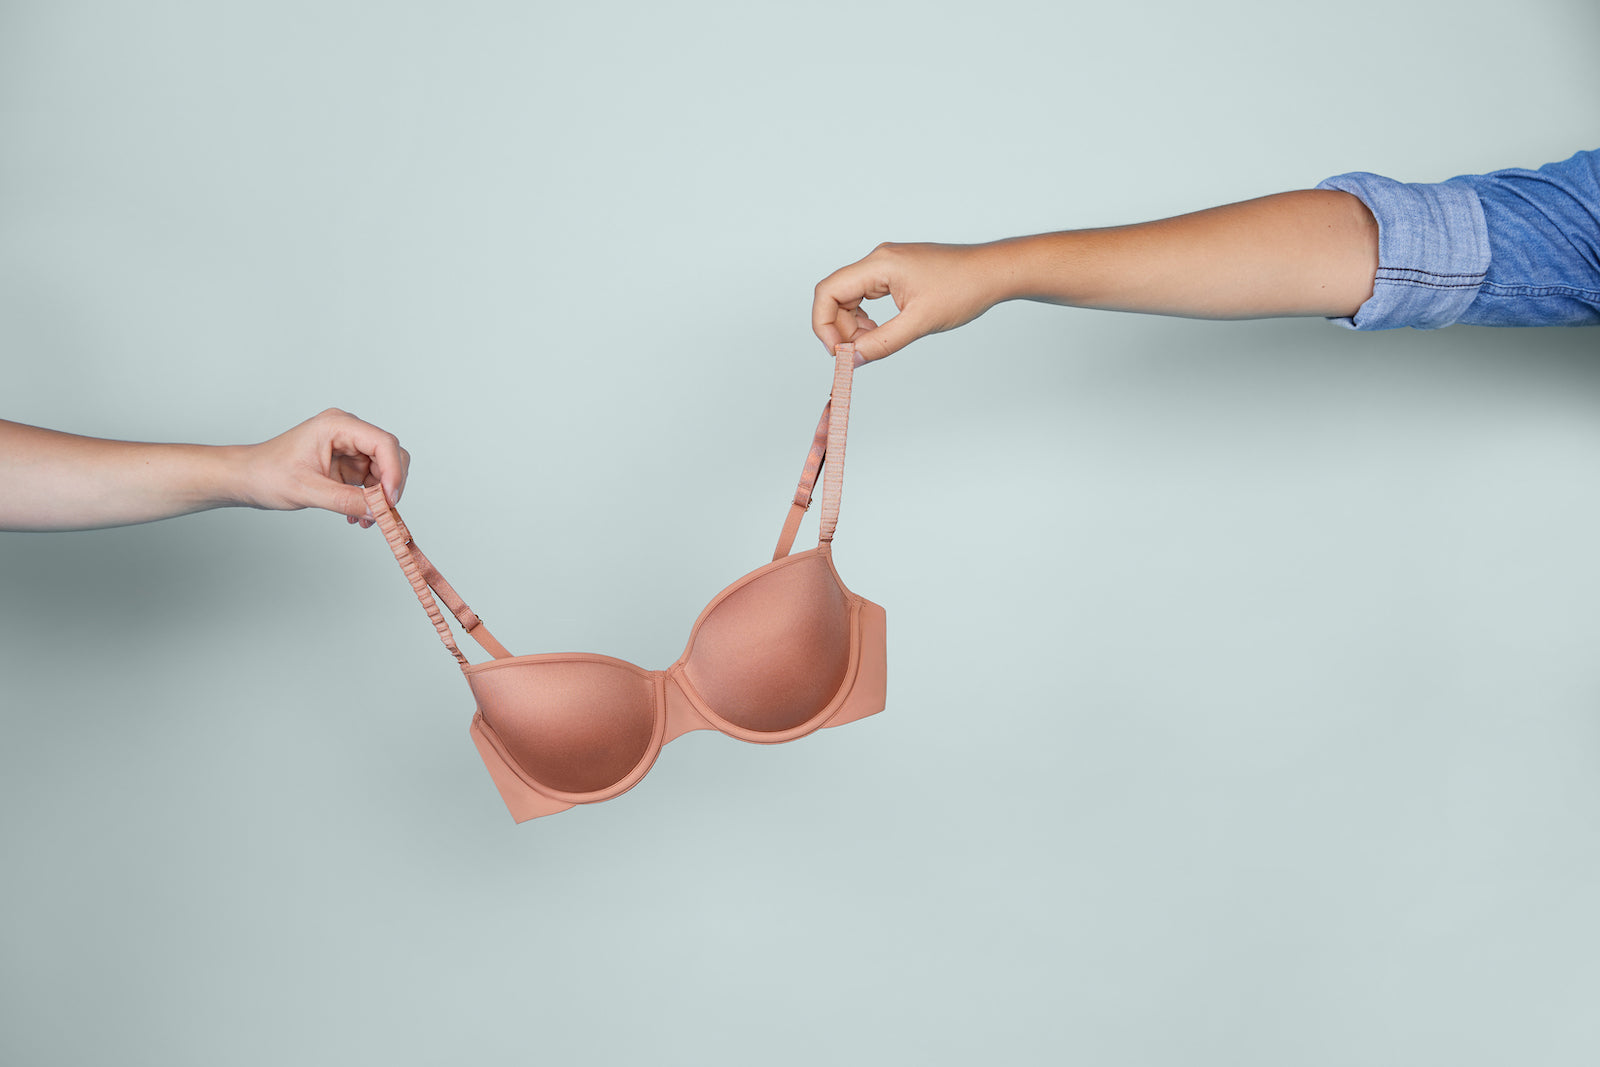 An amazing recycling with your old bra, recycling